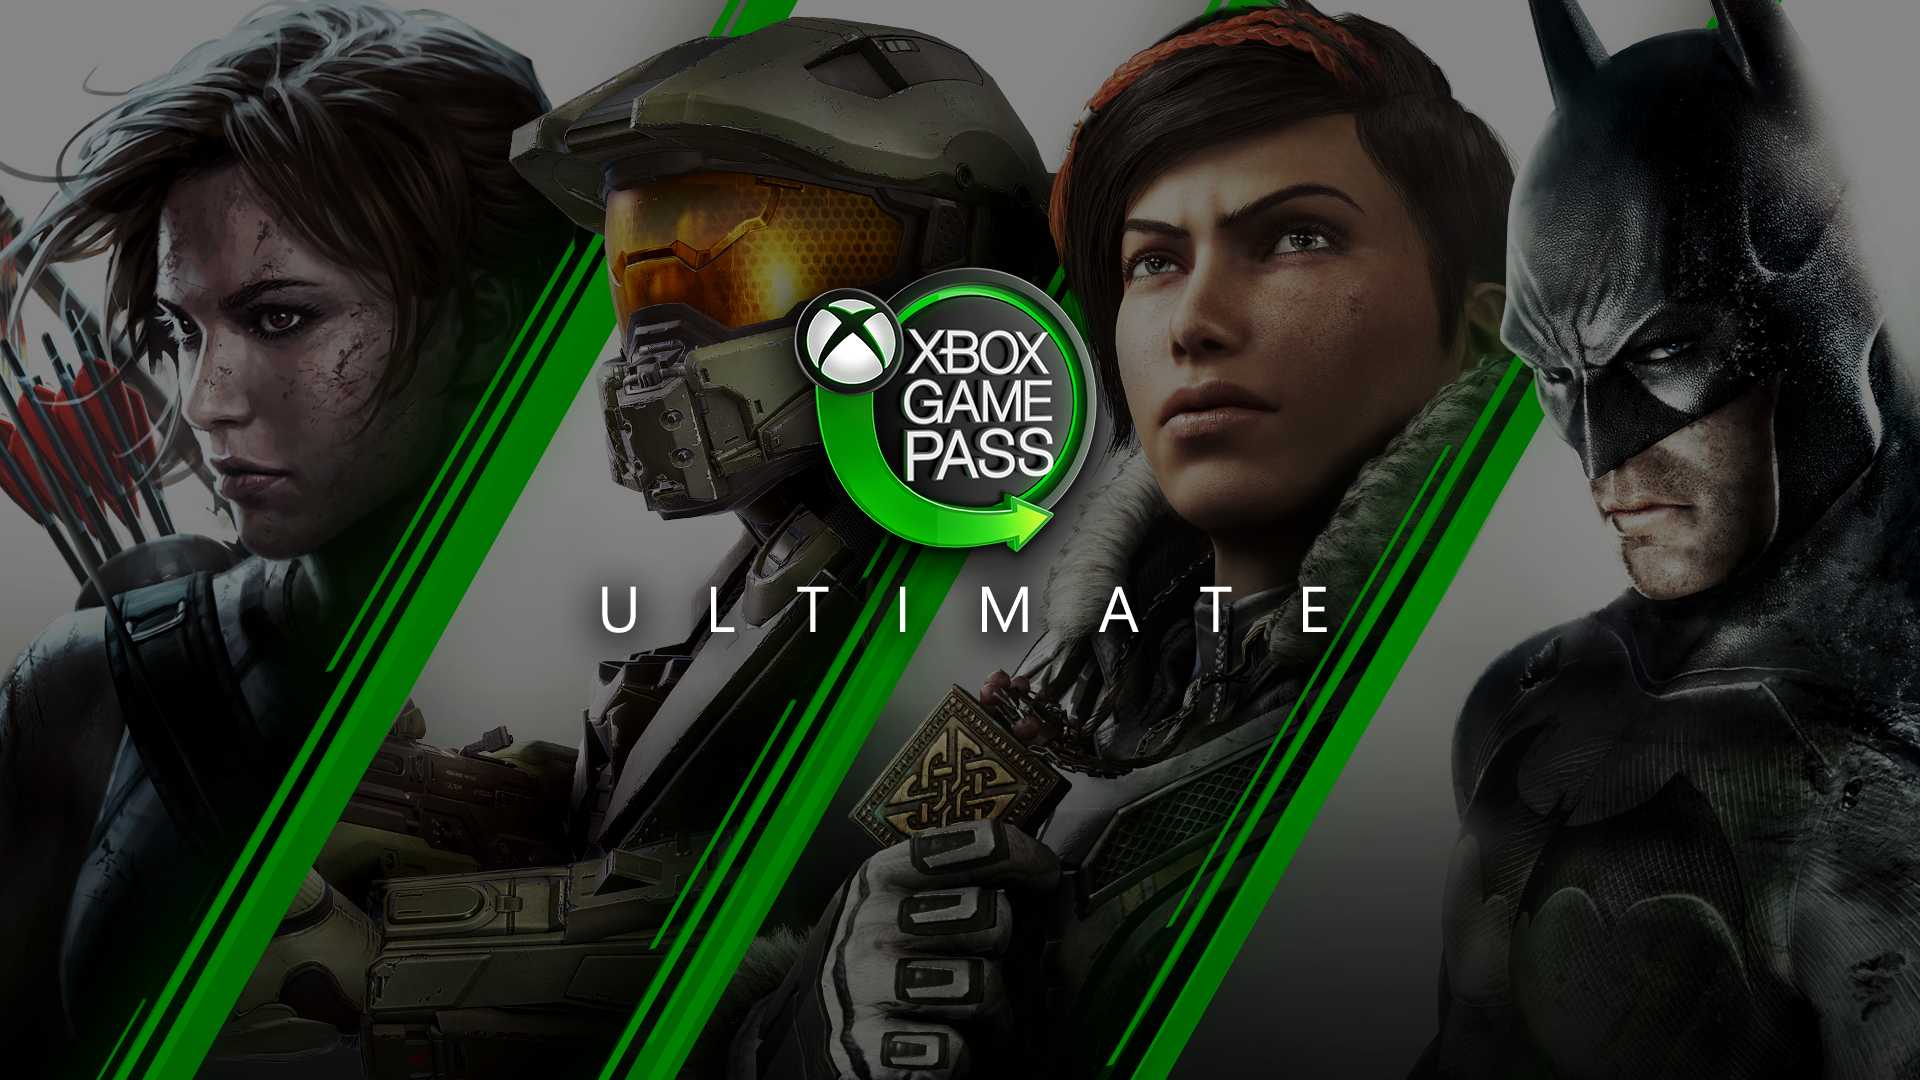 Xbox Game Pass Ultimate deals can save you 30% this Memorial Day weekend